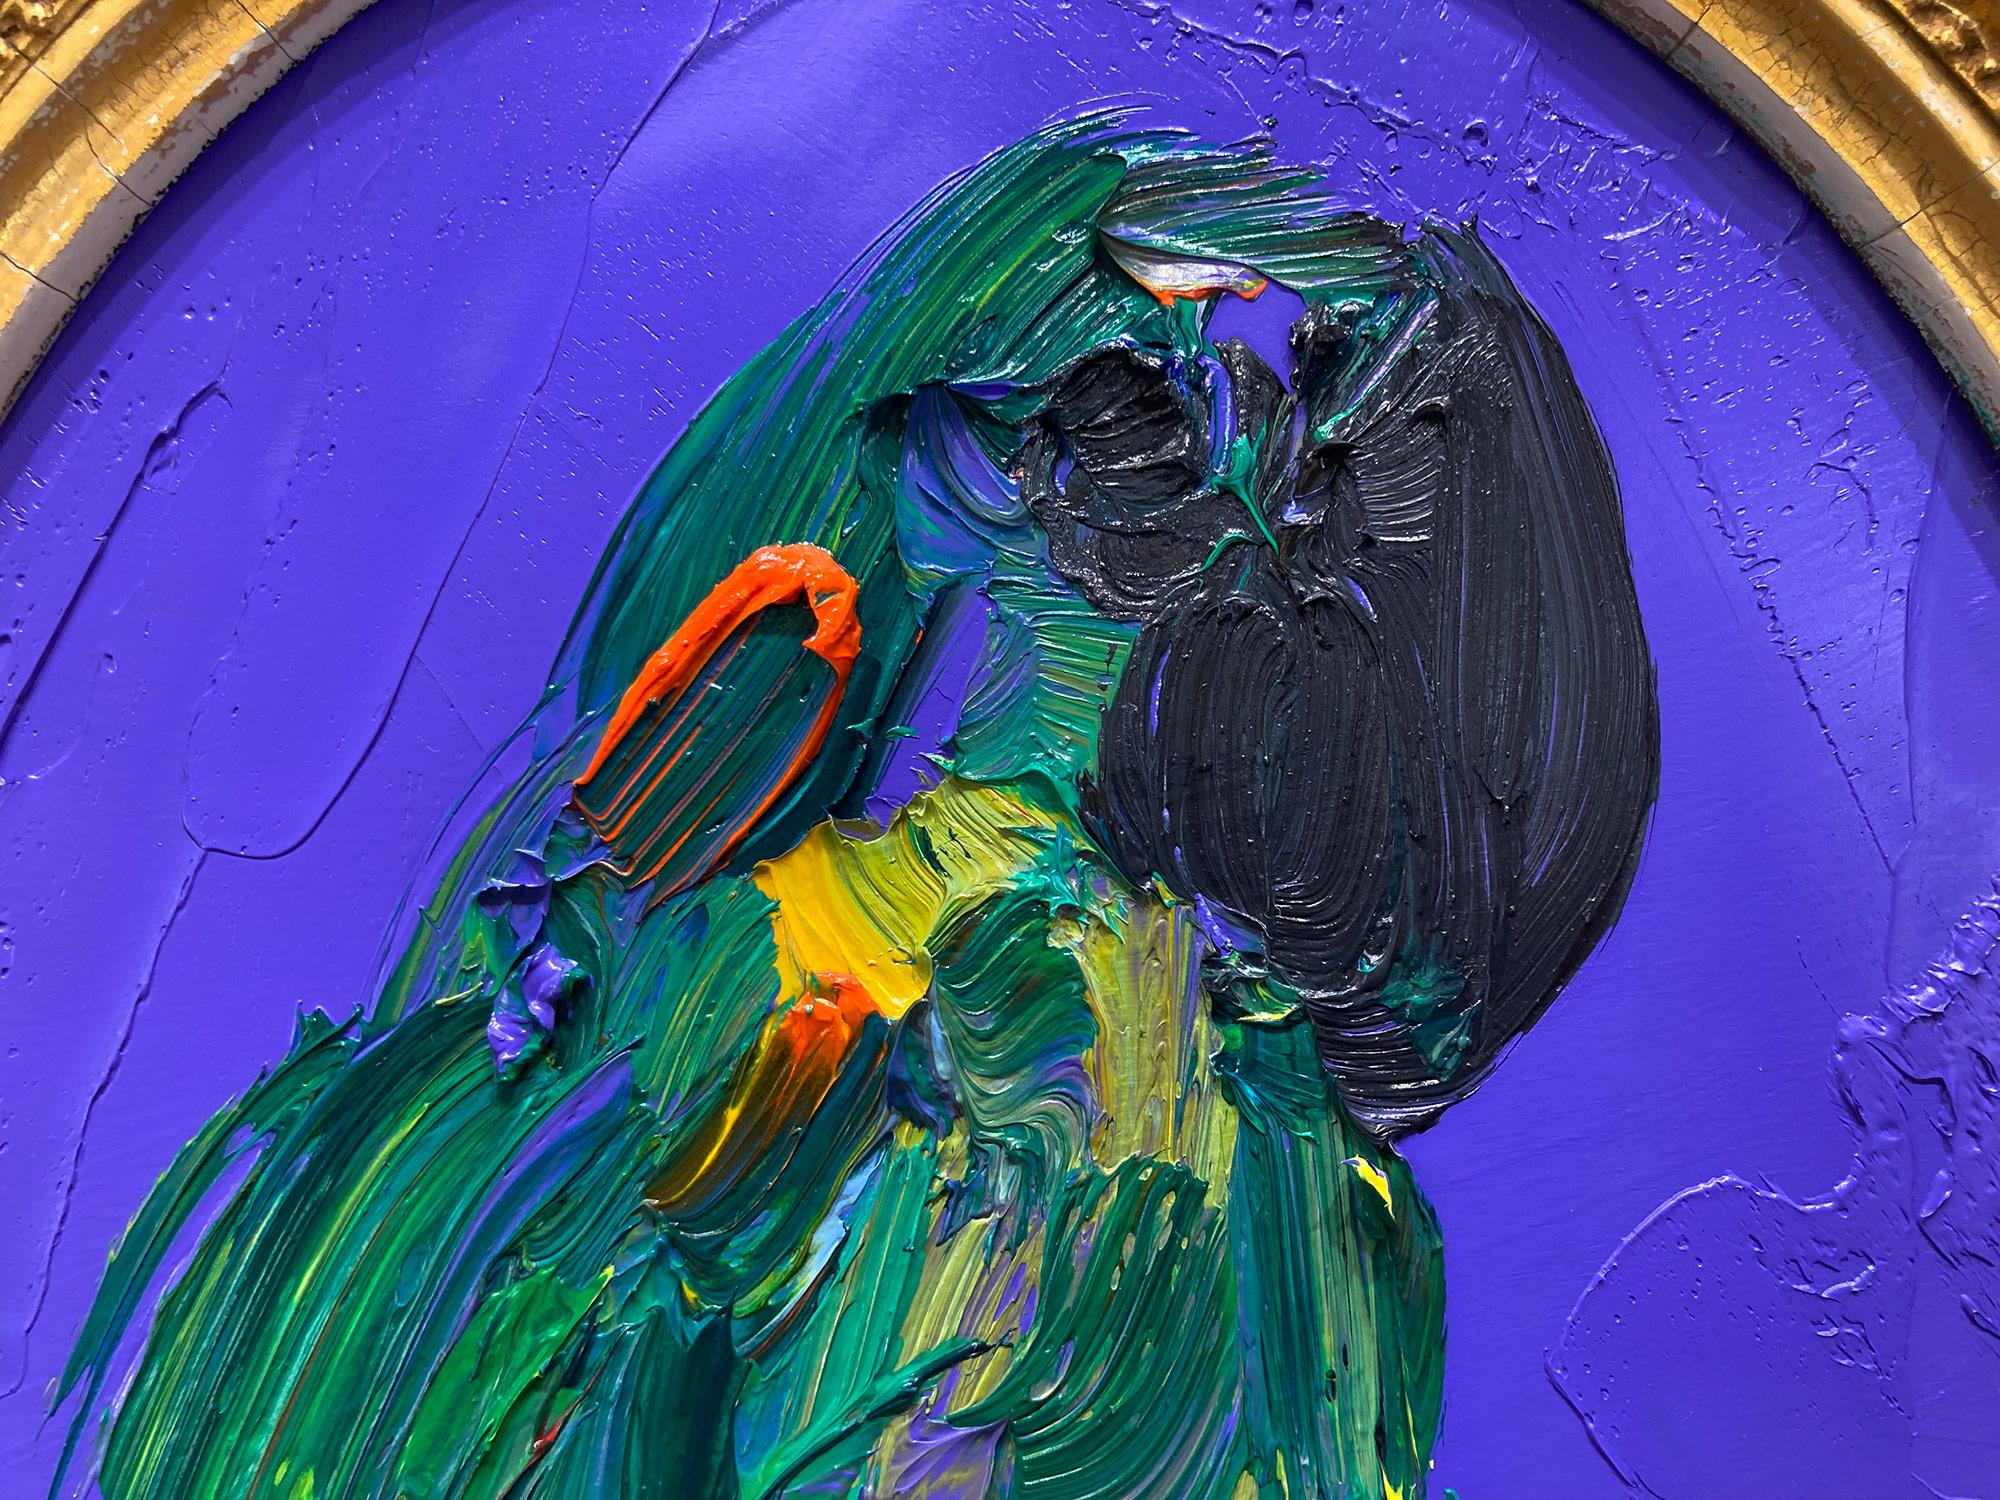 A wonderful composition of one of Slonem's most iconic subjects of a single Parrot on a dark blue/ purple background. The thick use of paint is greatly recognizable as he slathers on layer after layer of oil paint. He then draws in the green bird